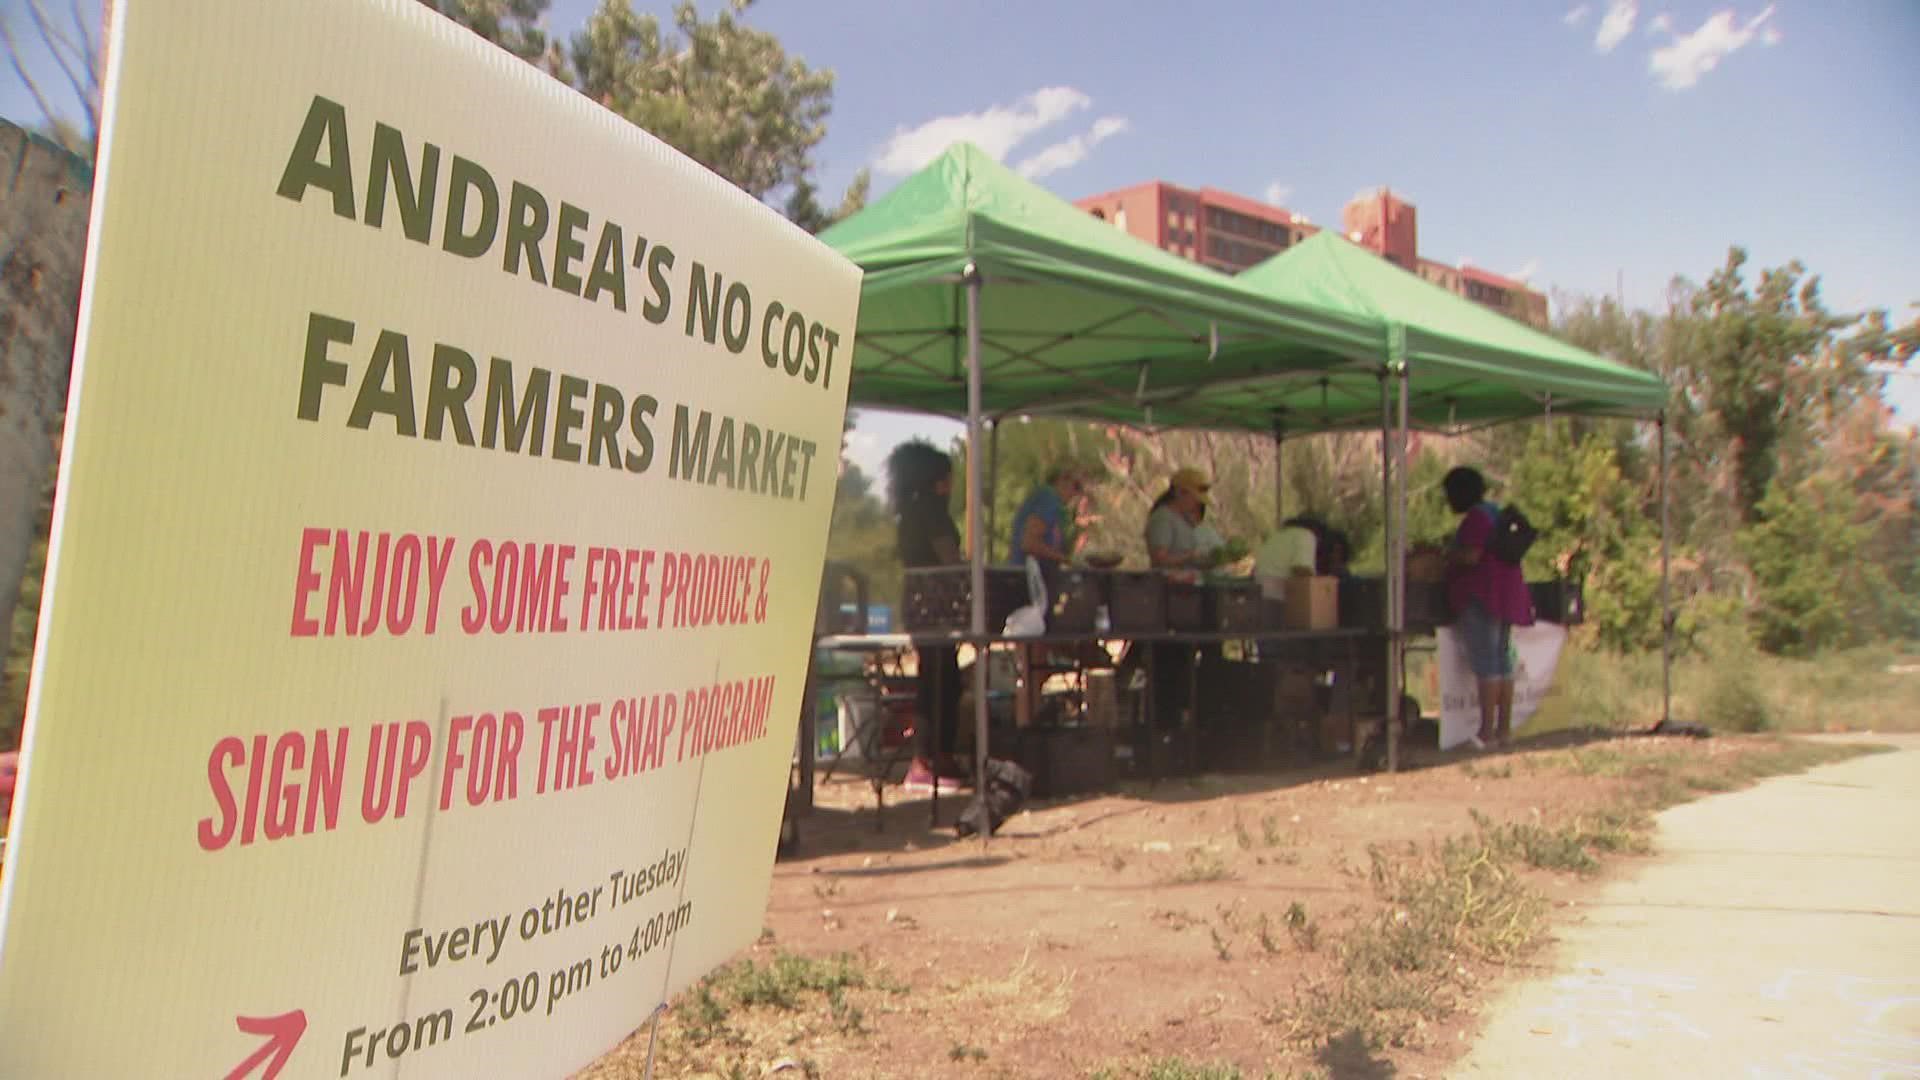 Andrea's No Cost Farmers Market often helps those who may not qualify for aid such as SNAP benefits. Others turn to the market where no questions are asked for food.